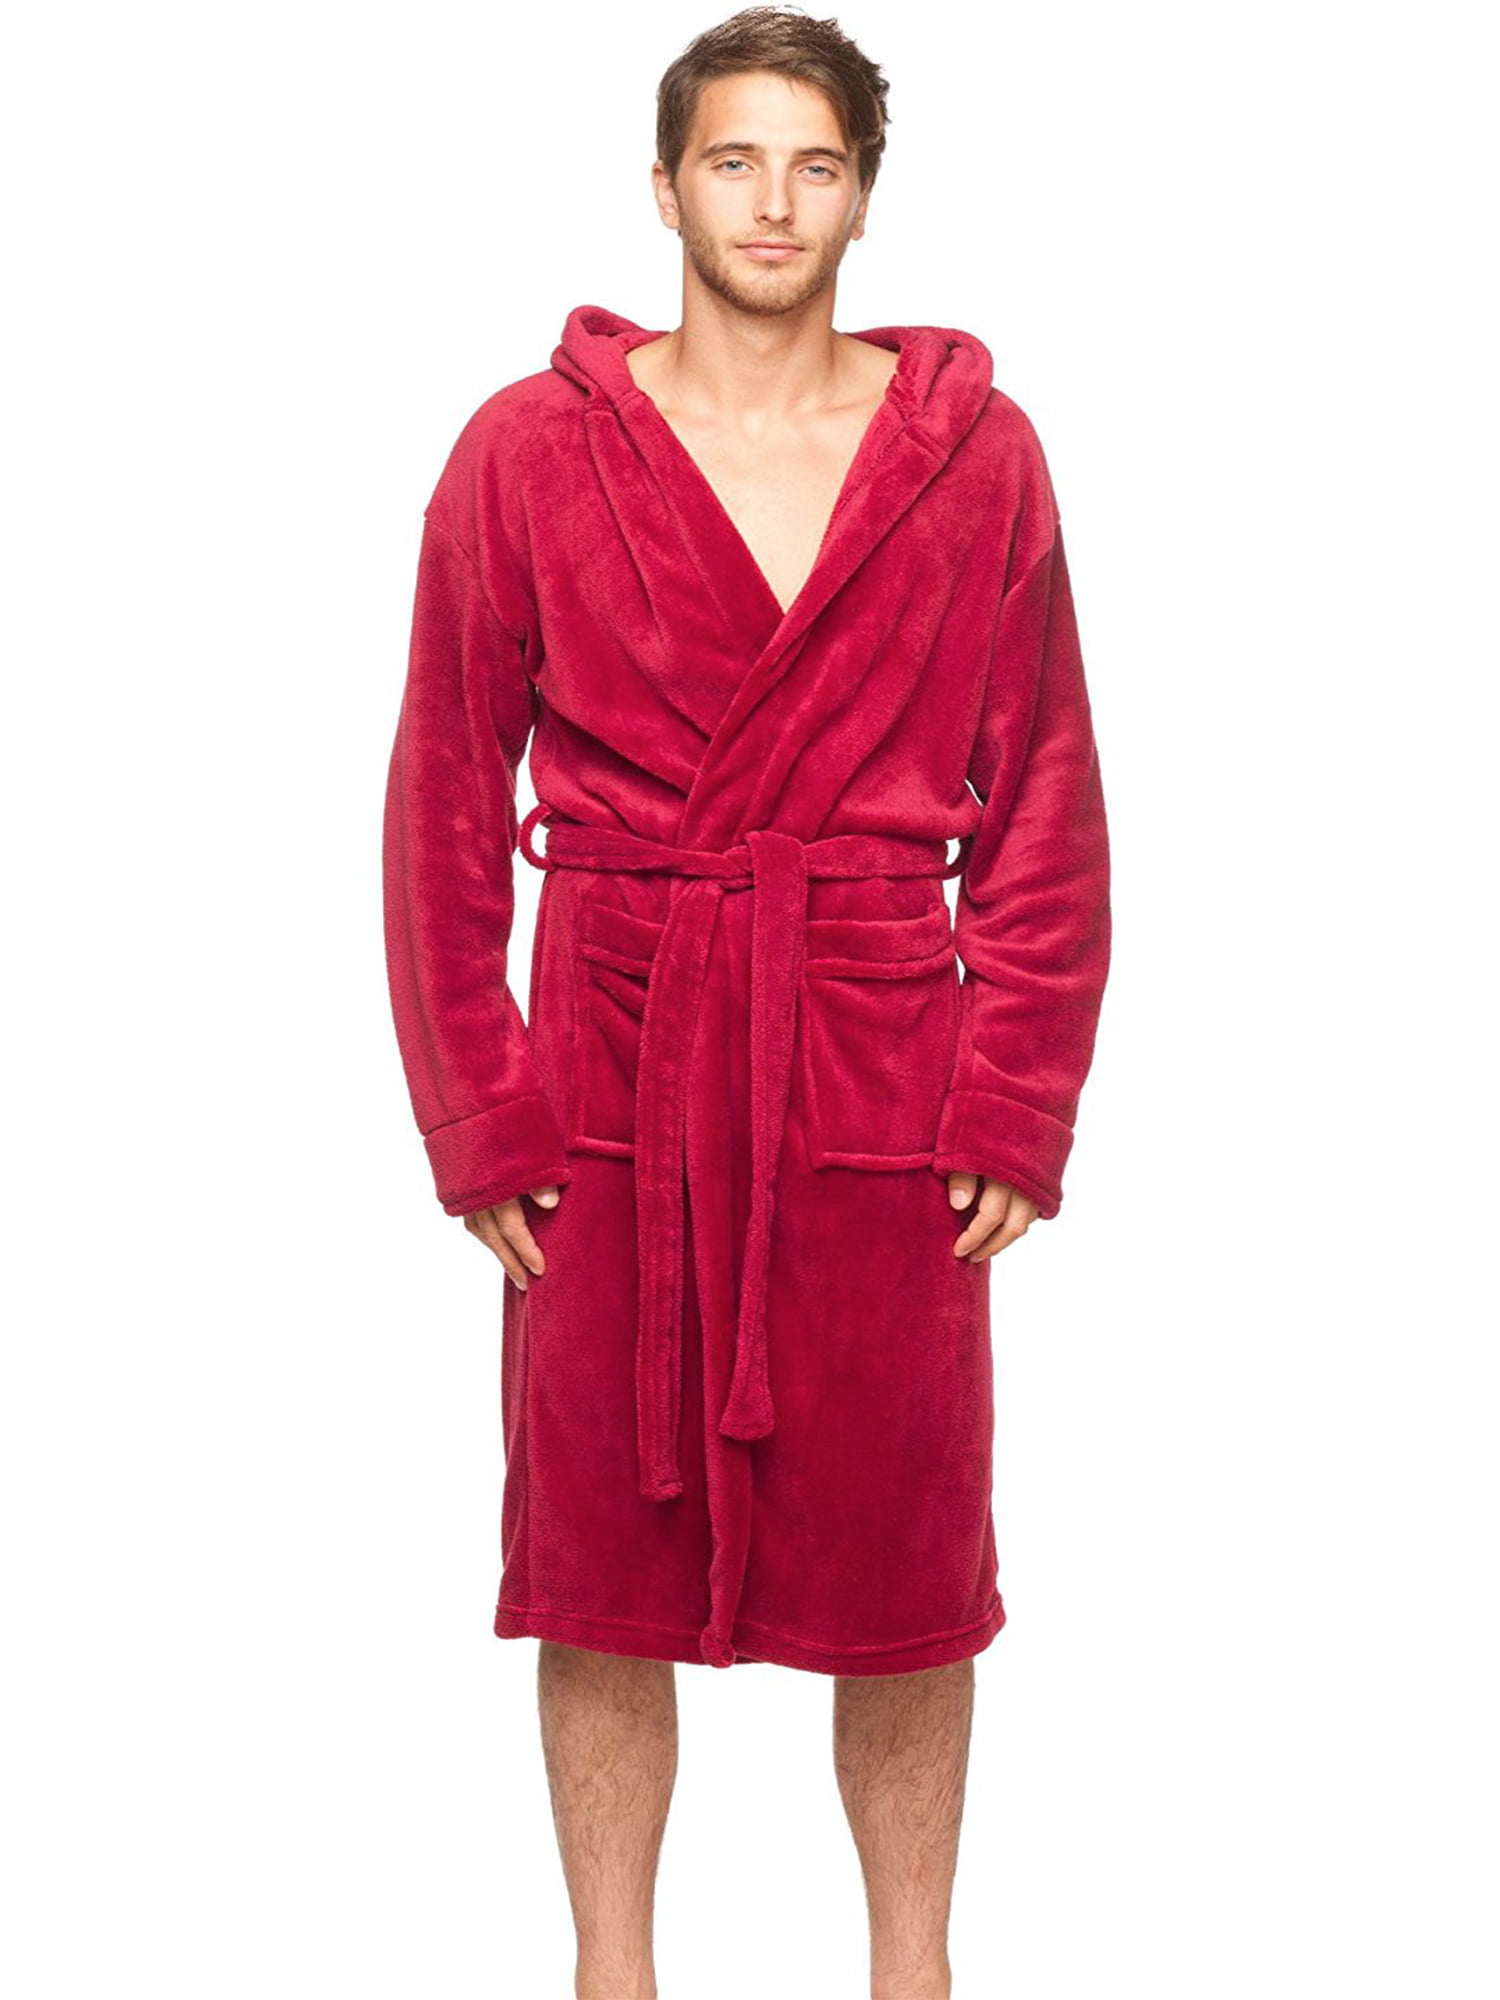 Wanted Mens Soft Lightweight Plush Fleece Robe with Front Pockets